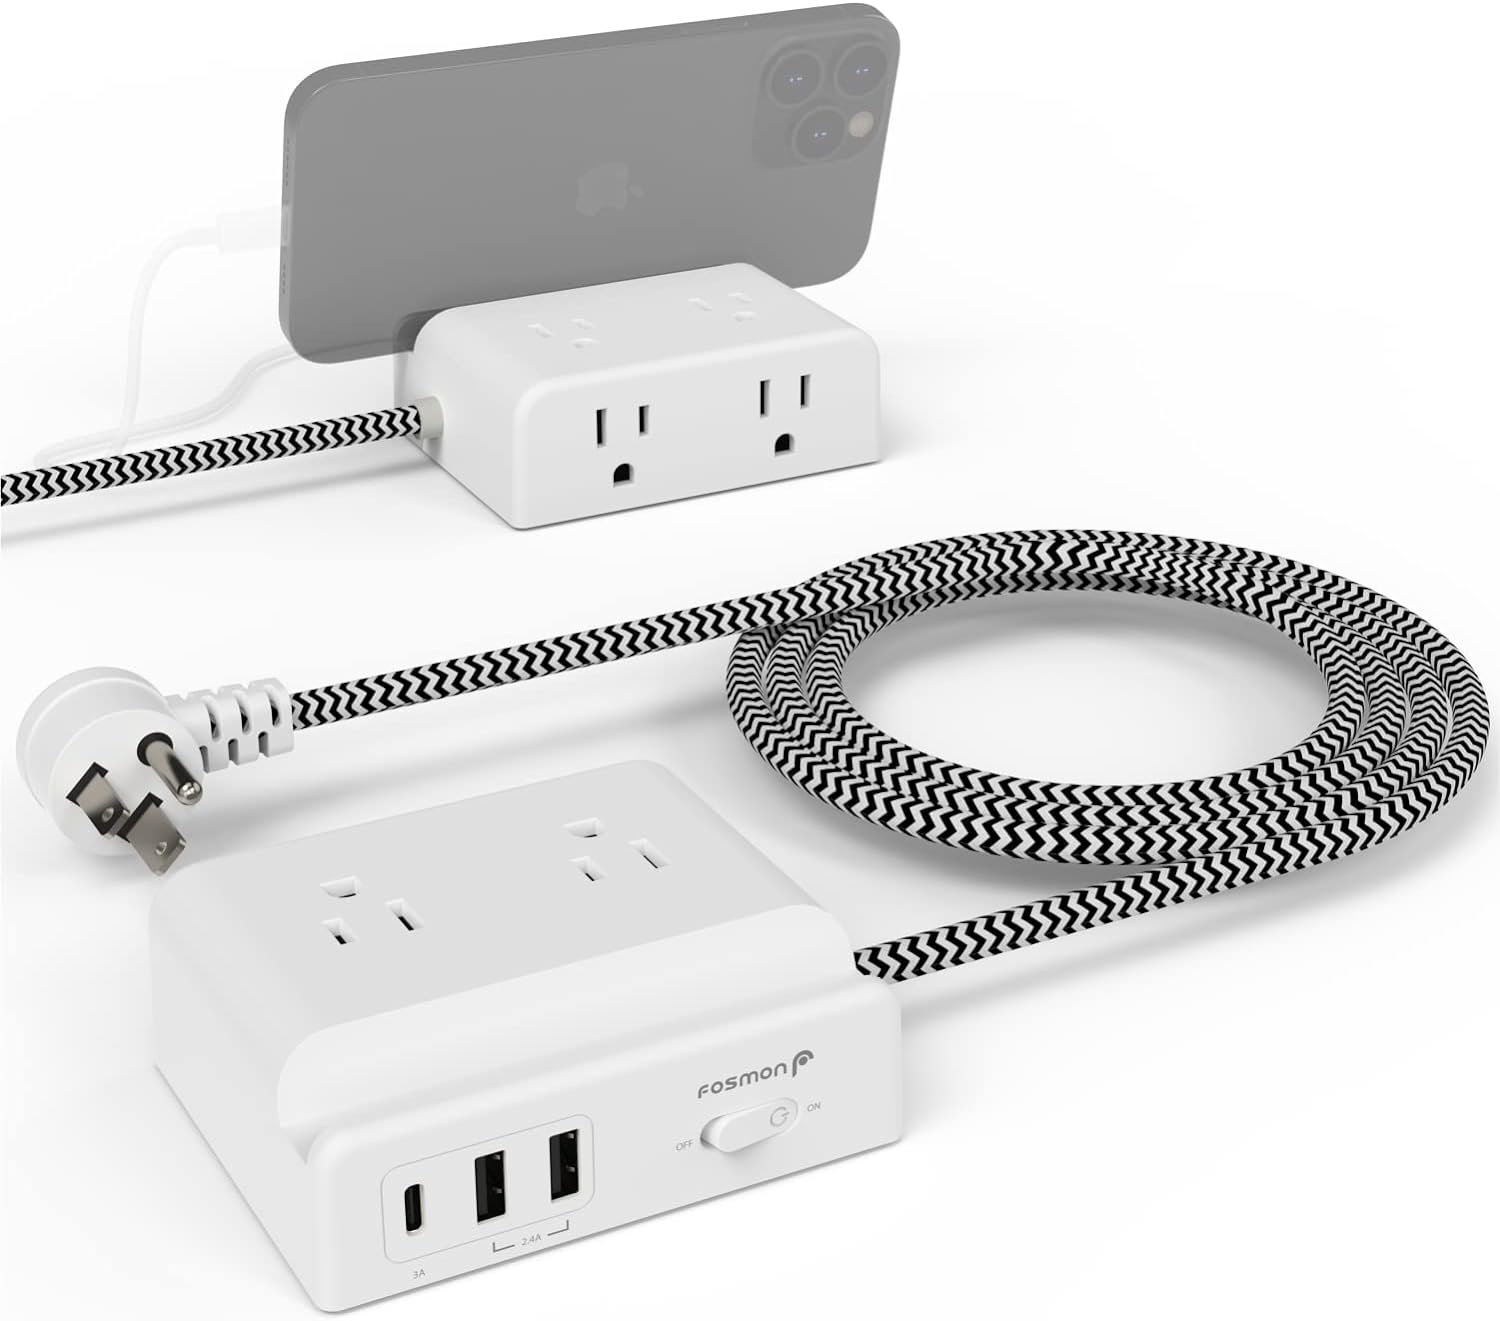 Fosmon Desktop Power Strip with 4 Outlets 3 USB with 5FT Braided Extension Cord Flat Plug, USB C Desk Charging Station, Mountable, Non Surge Protector for Travel, Cruise Ship, ETL Listed